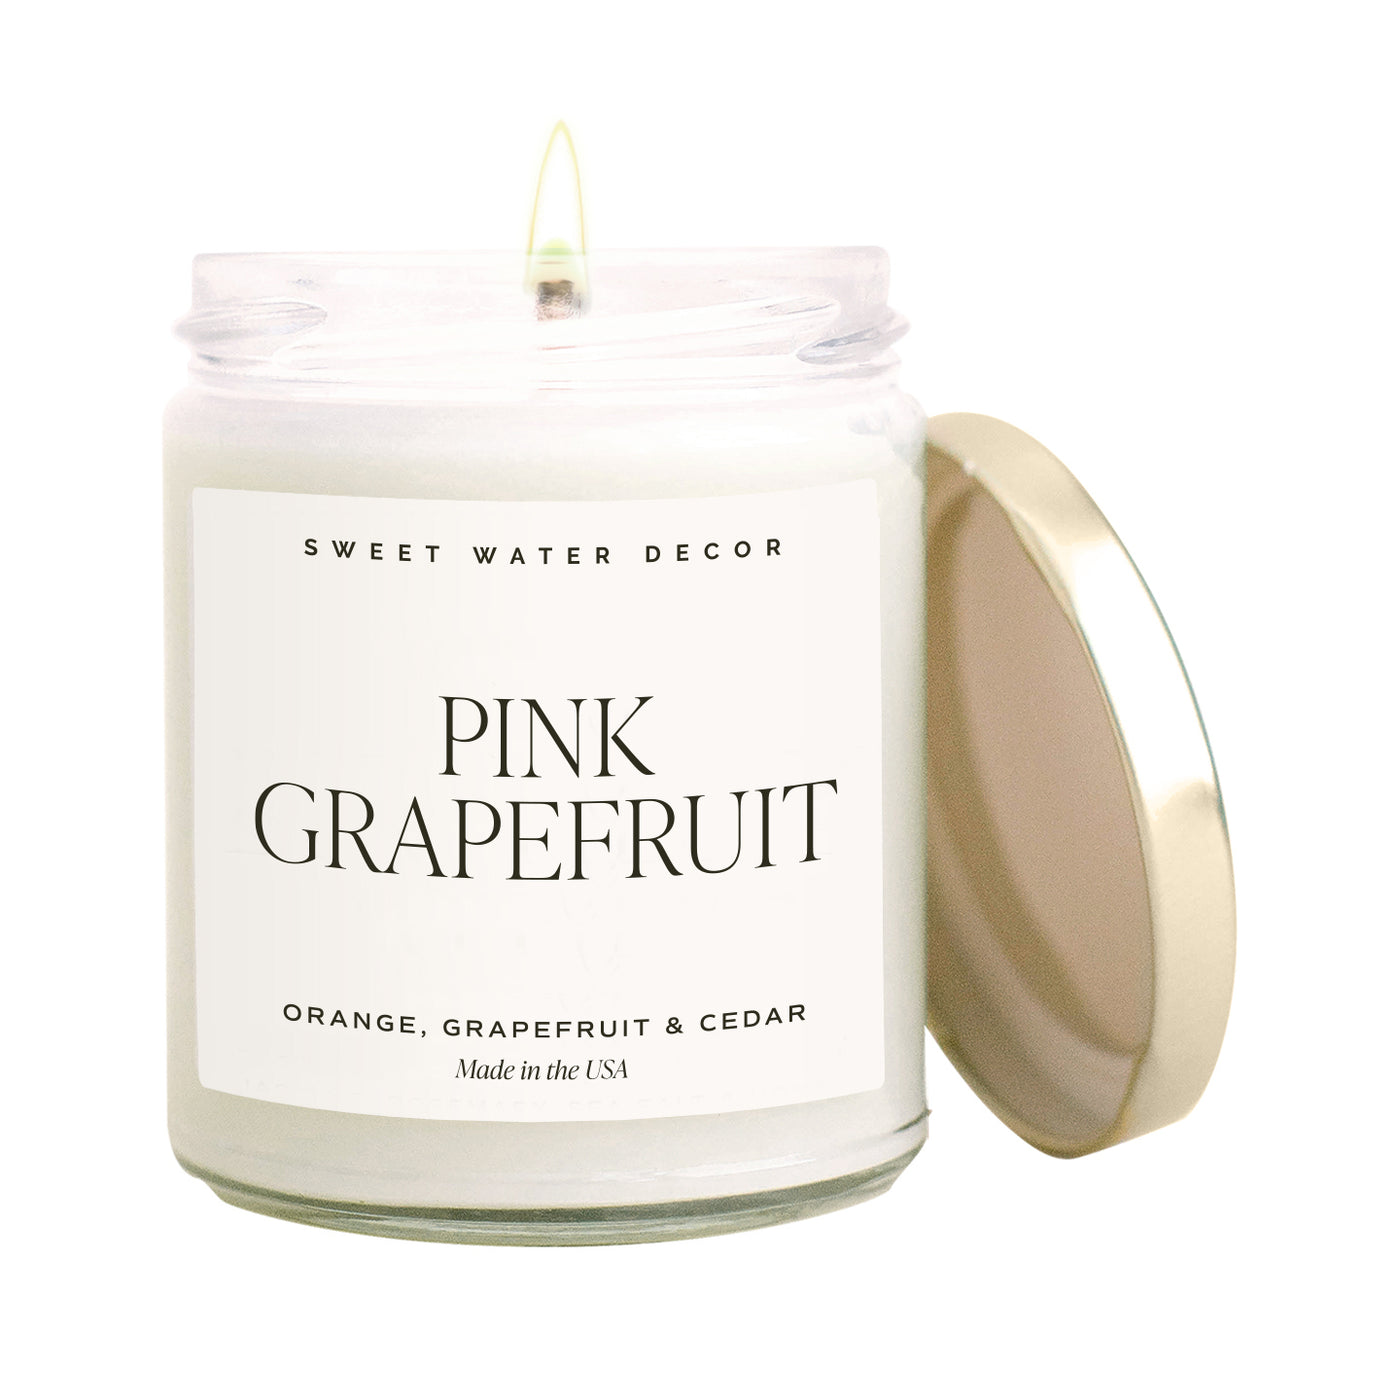 Pink Grapefruit Soy Candle - Clear Jar - 9 oz - Sweet Water Decor - Candles